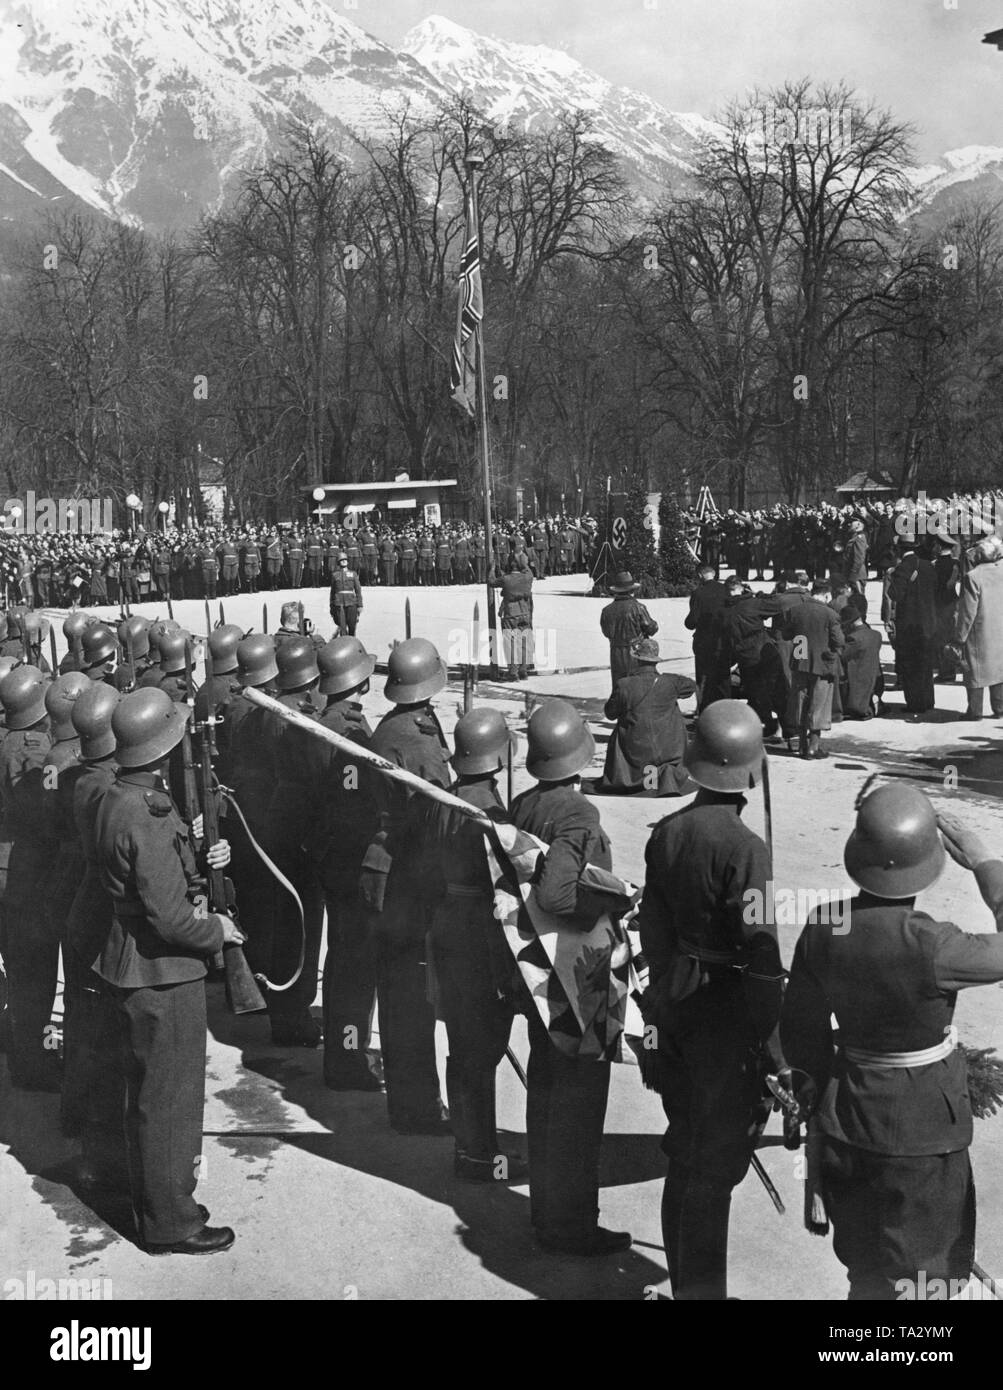 The Reichskriegsflagge is hoisted on the Adolf-Hitler-Platz in Vienna on the occasion of the swearing-in of the Tiroler Jaeger-Regiment to Adolf Hitler. Stock Photo